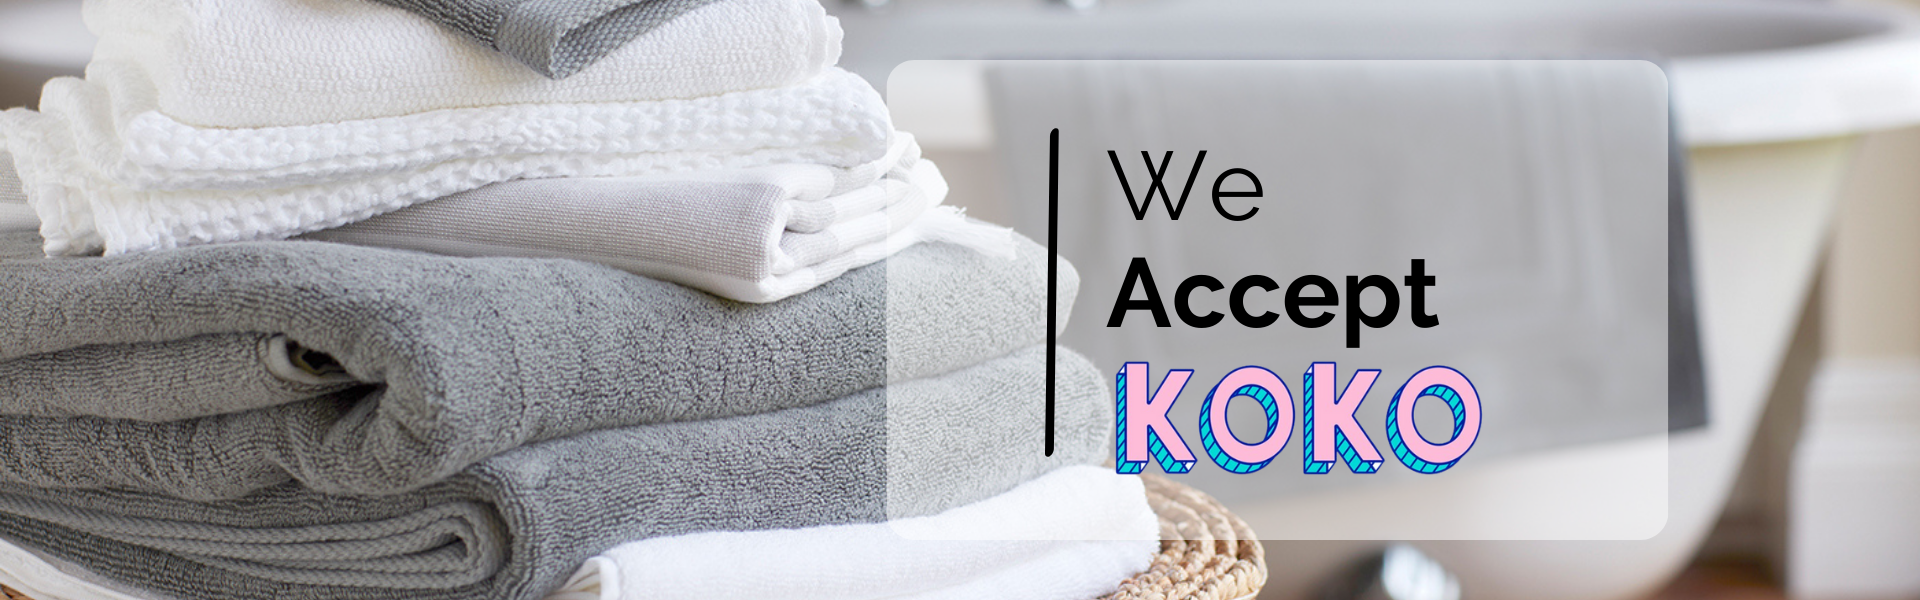 exclusive koko deals page banner for homepage slider